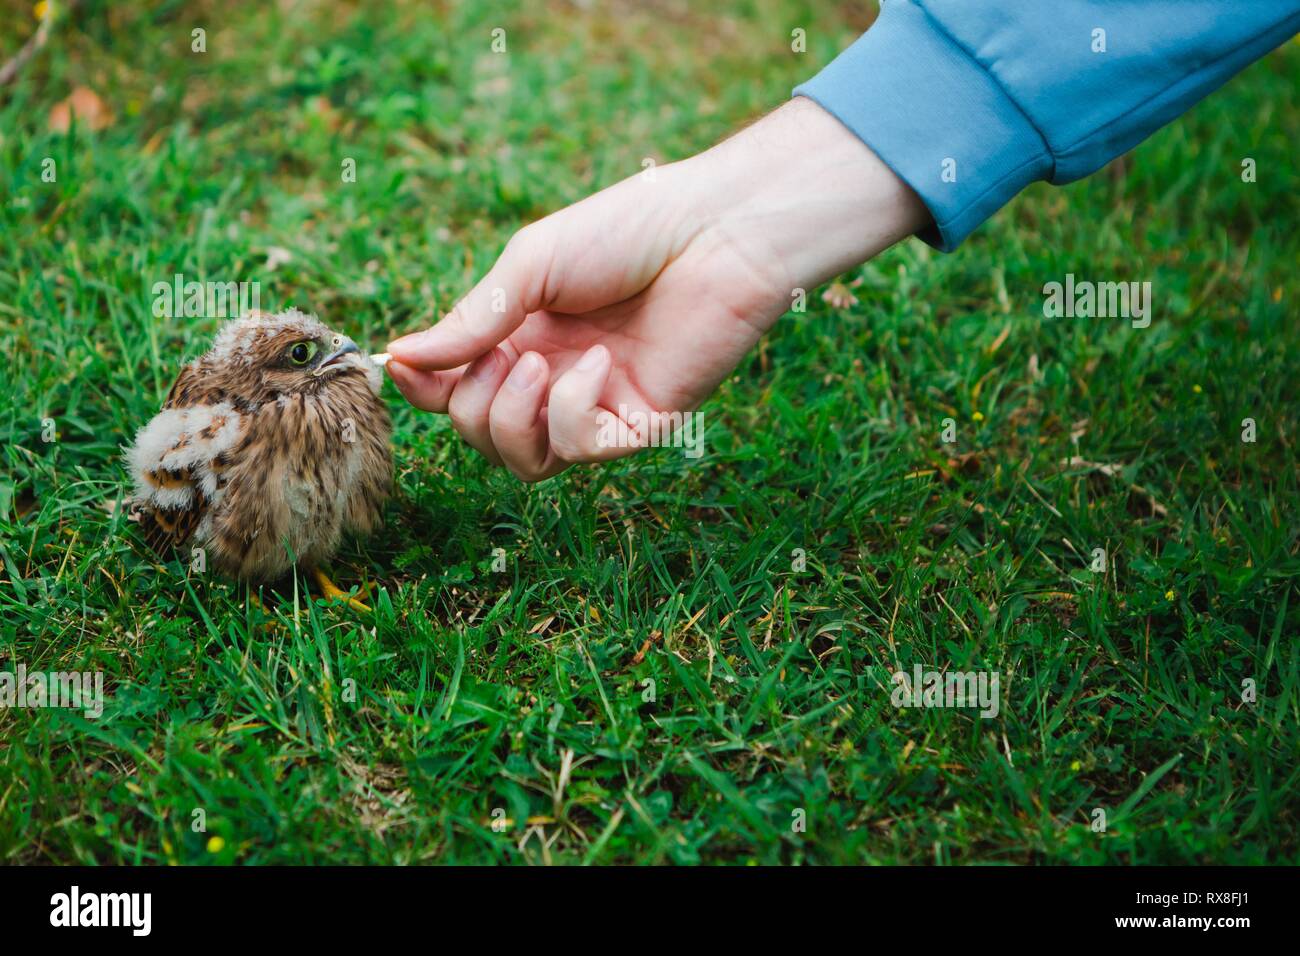 Feeding a nesting in real nature. Fallen out from nest. Power of connection  between human and animals Stock Photo - Alamy